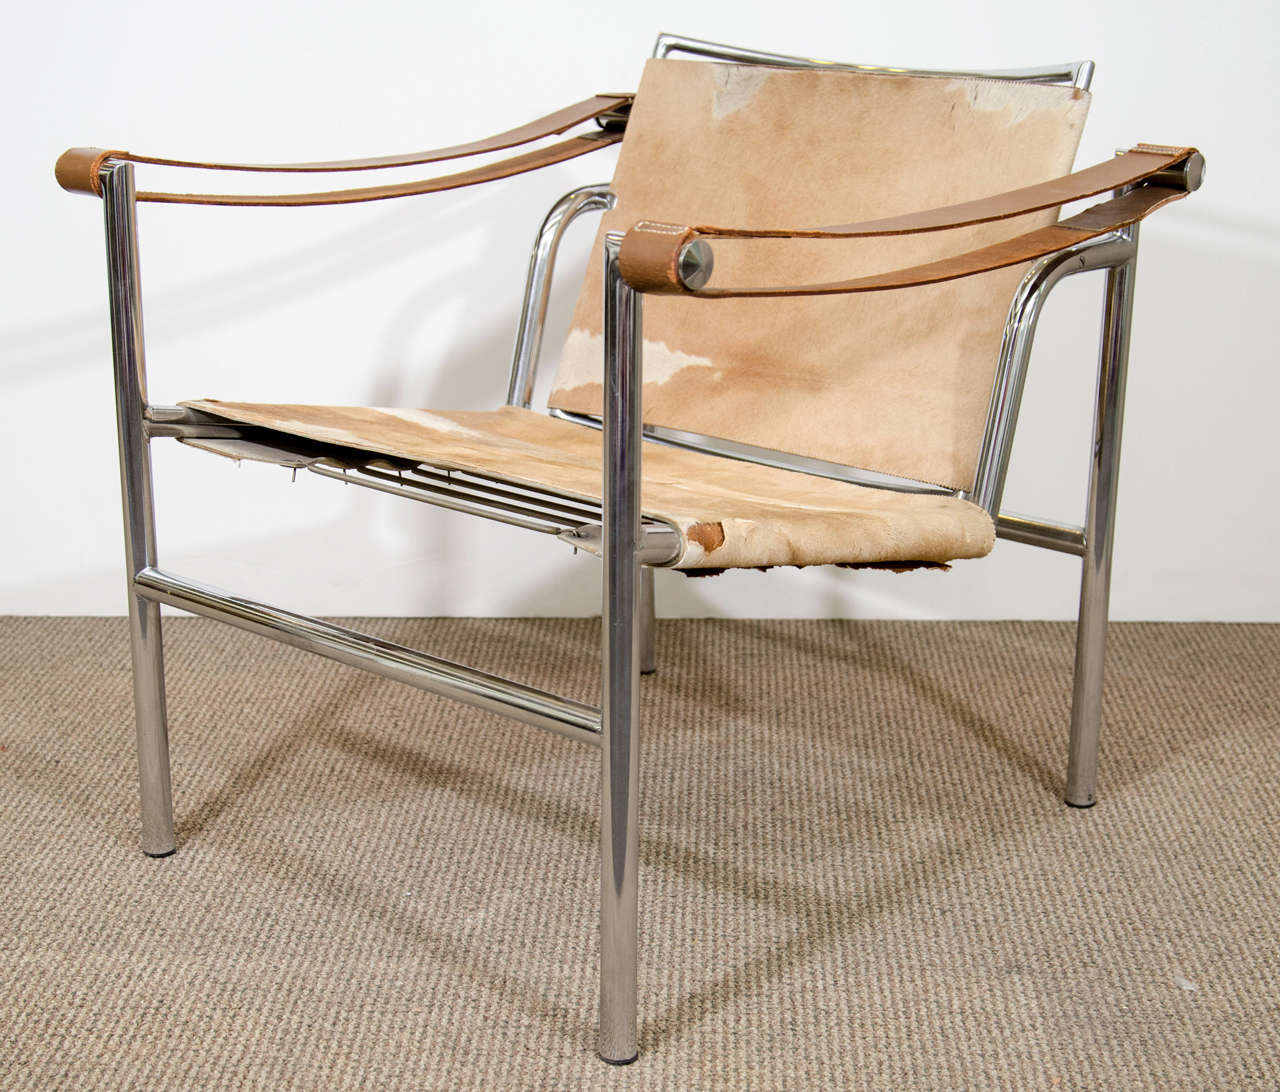 A vintage LC1 sling chair in cowhide with adjustable back, leather armrests and a tubular chrome frame. The piece was designed by Le Corbusier and manufactured by Stendig.